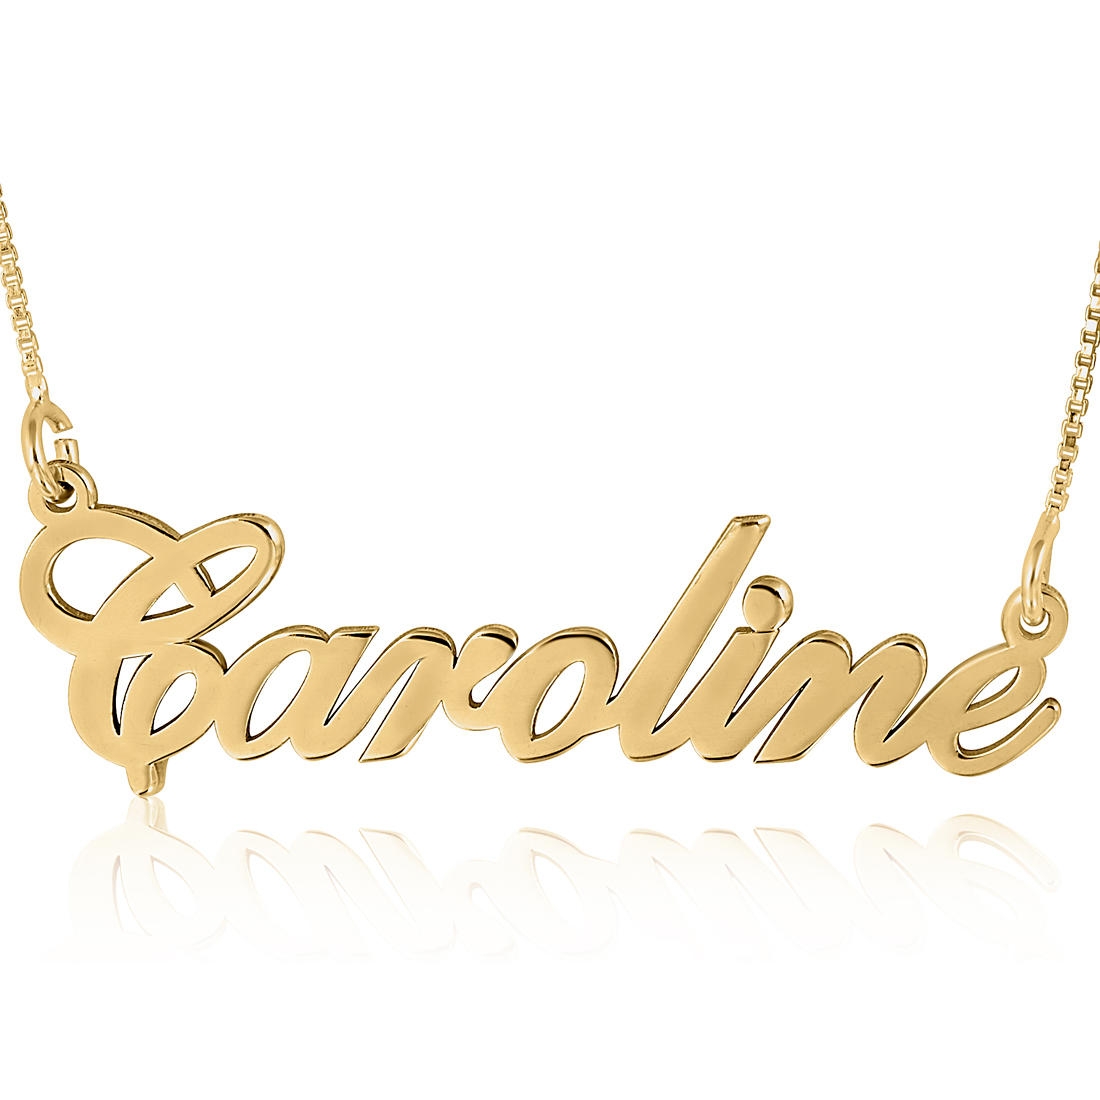 Classic Elegance Name Necklace, 24k Gold Plated - 1